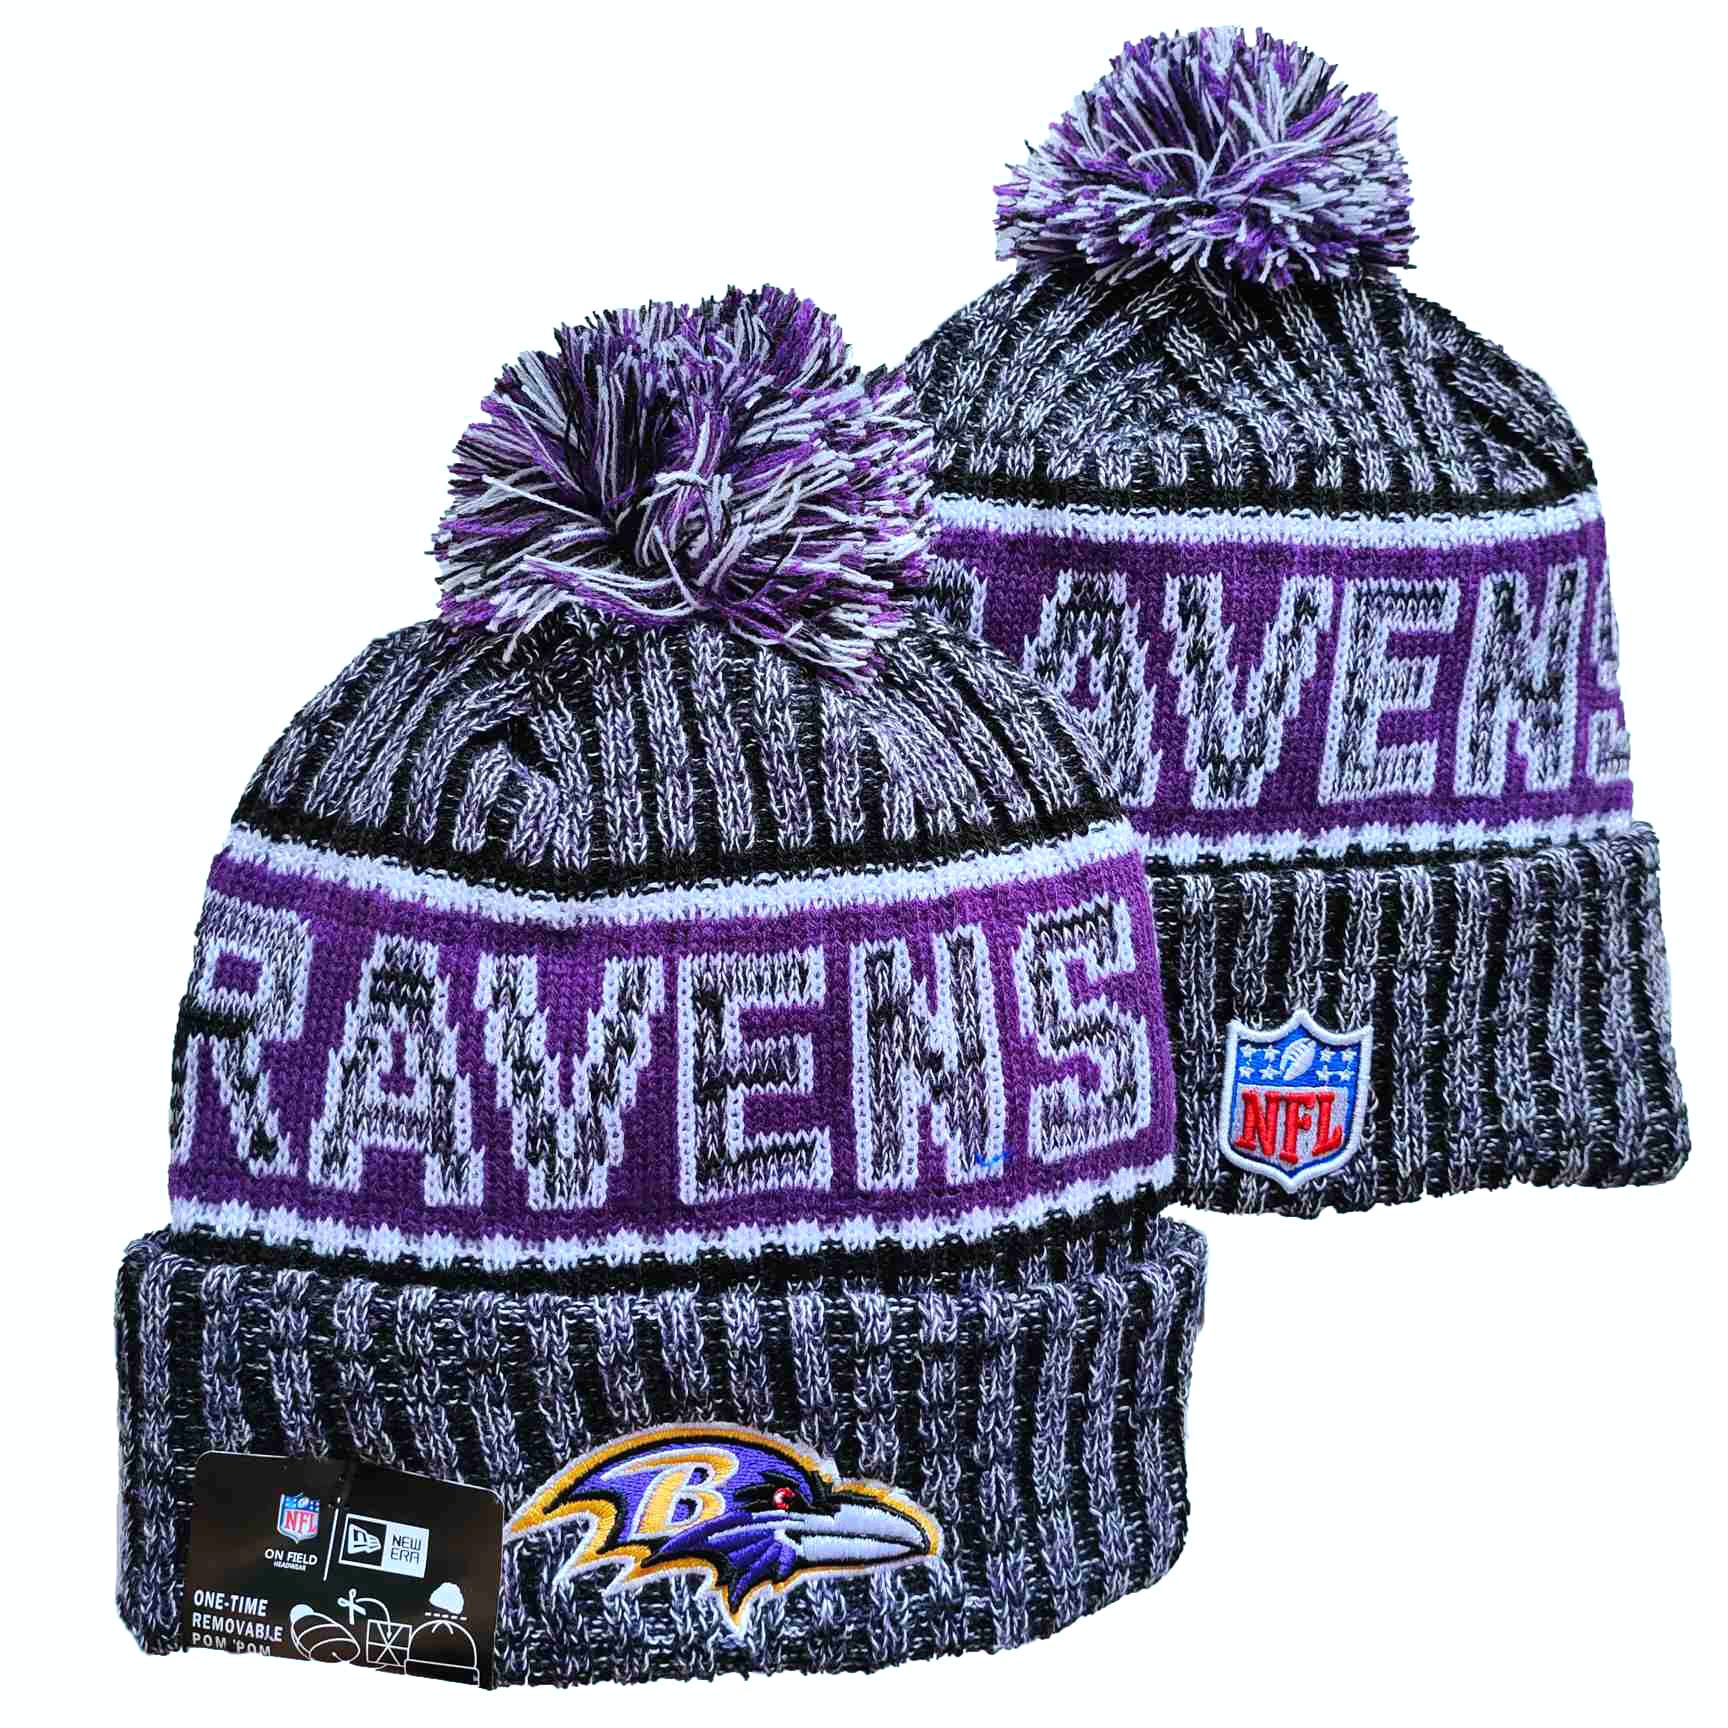 NFL Baltimore Ravens Beanies Knit Hats-YD1200